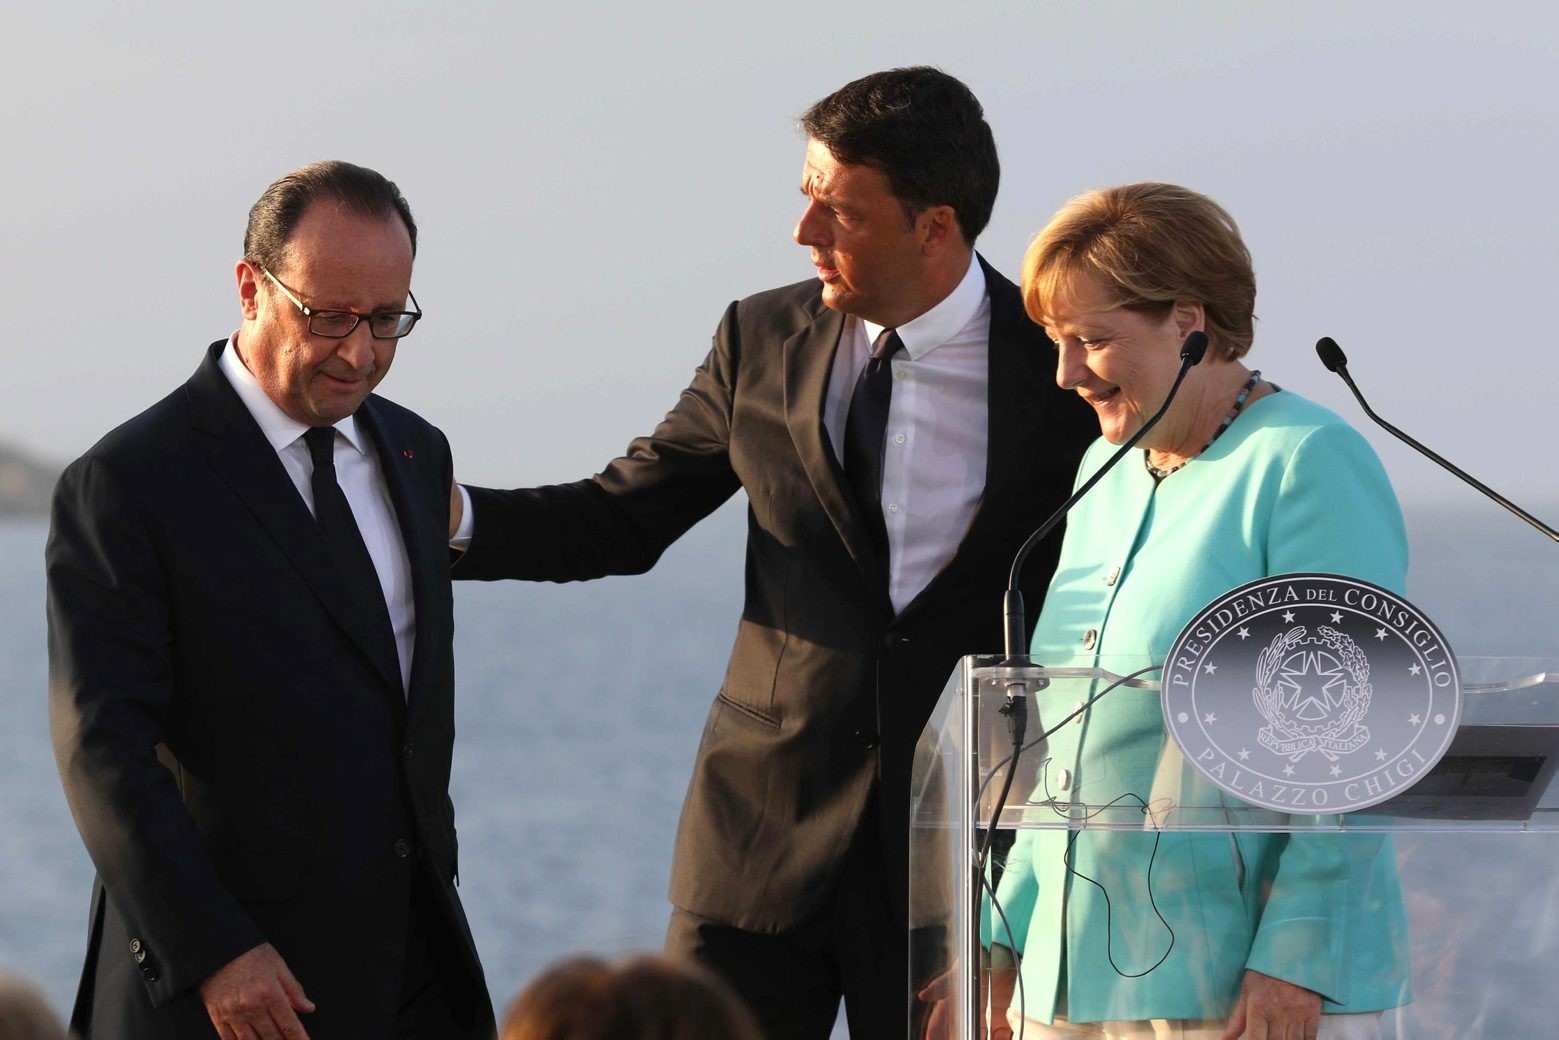 Italian Premier Matteo Renzi, center, stands between French President Francois Hollande, left, and German Chancellor Angela Merkel, on the deck of the Italian aircraft carrier Garibaldi off Ventotene island's shores, Italy, Monday, Aug. 22, 2016. The leaders of Italy, France and Germany headed Monday to one of the birthplaces of European unity in a symbolic bid to relaunch the European project following Britain's decision to leave the EU. (Cesare Abbate/ANSA via AP) Italy Brexit Summit